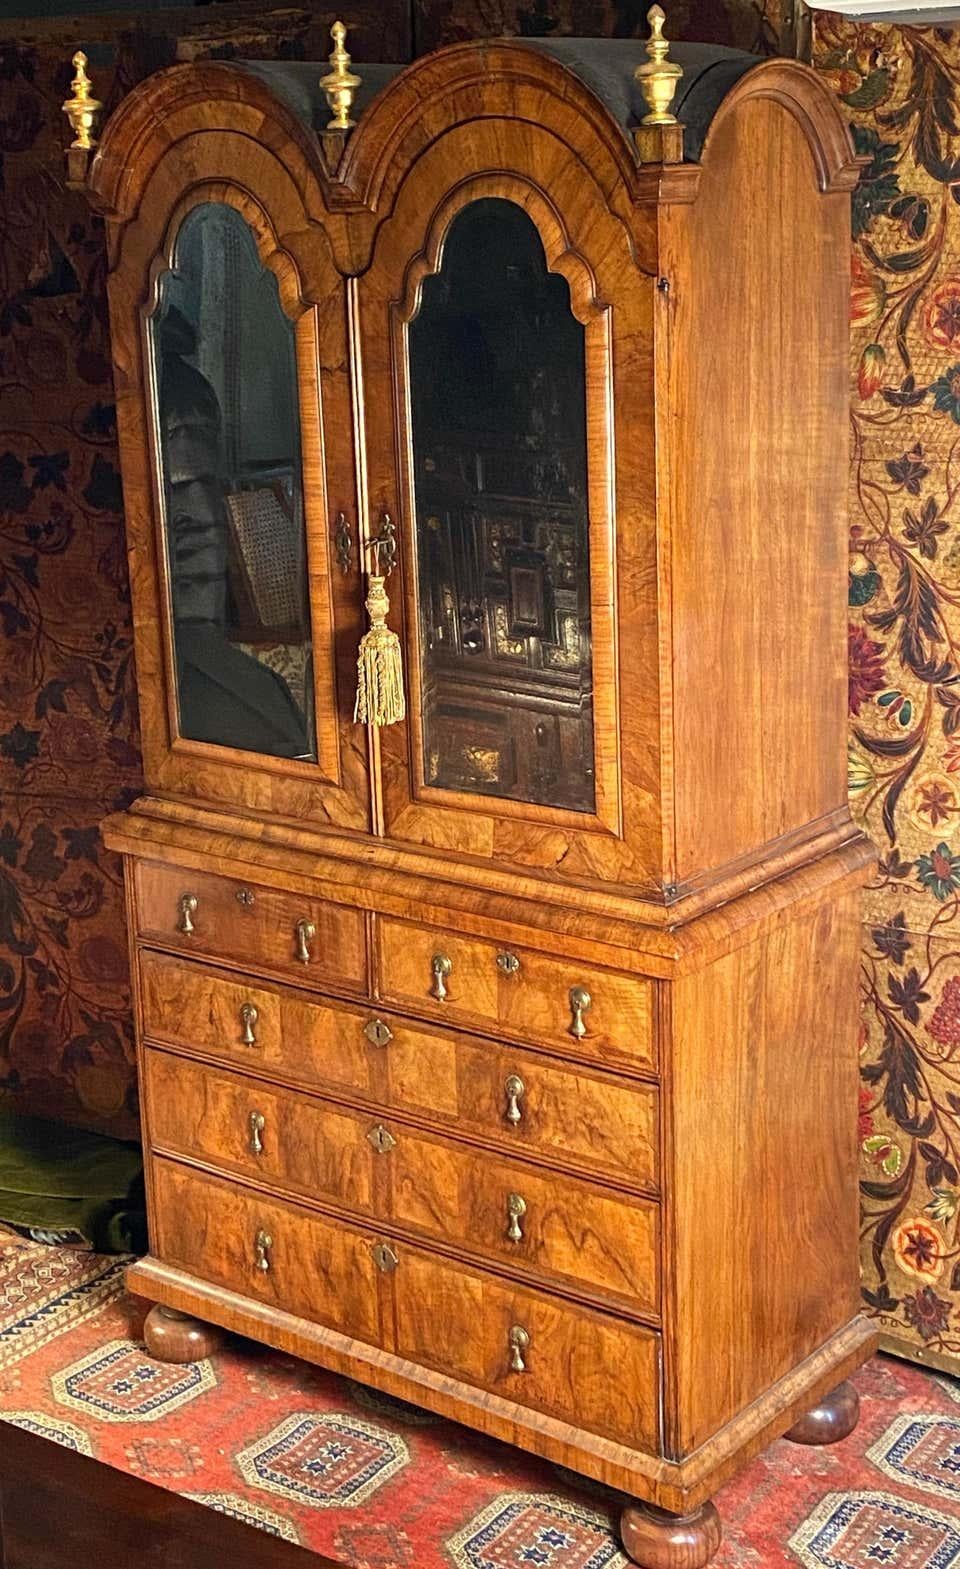 A Queen Anne period walnut double-dome bookcase cabinet.

This early-18th century walnut bookcase is veneered throughout in figured walnut, and is feather banded. 
The bold cross-grain mouldings are particularly well executed. The cabinet doors with